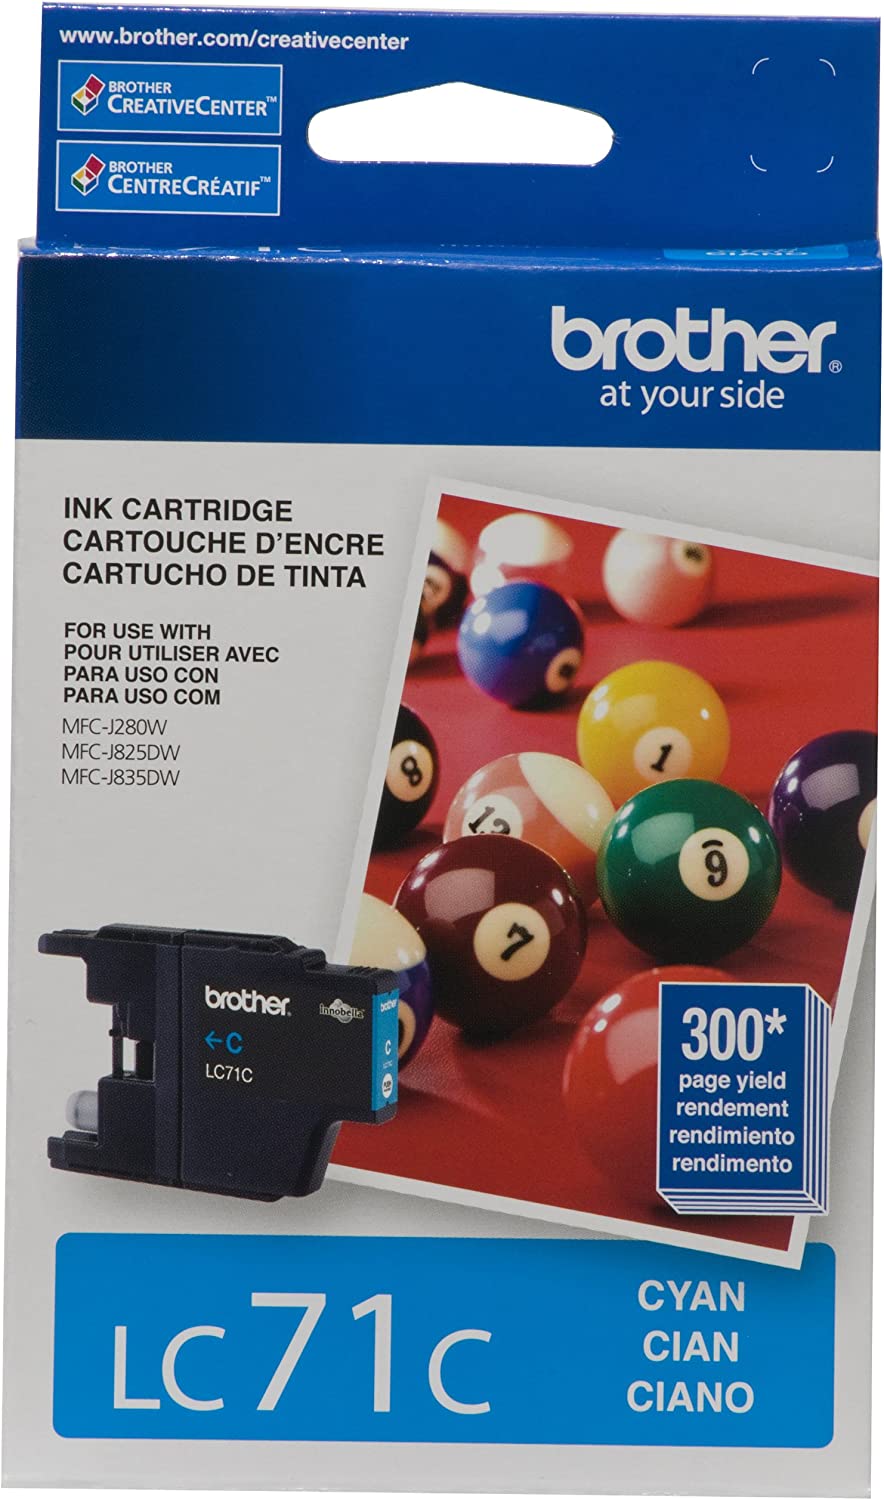 Tinta Brother Lc71C Cyan 300 Pag - Lc71C